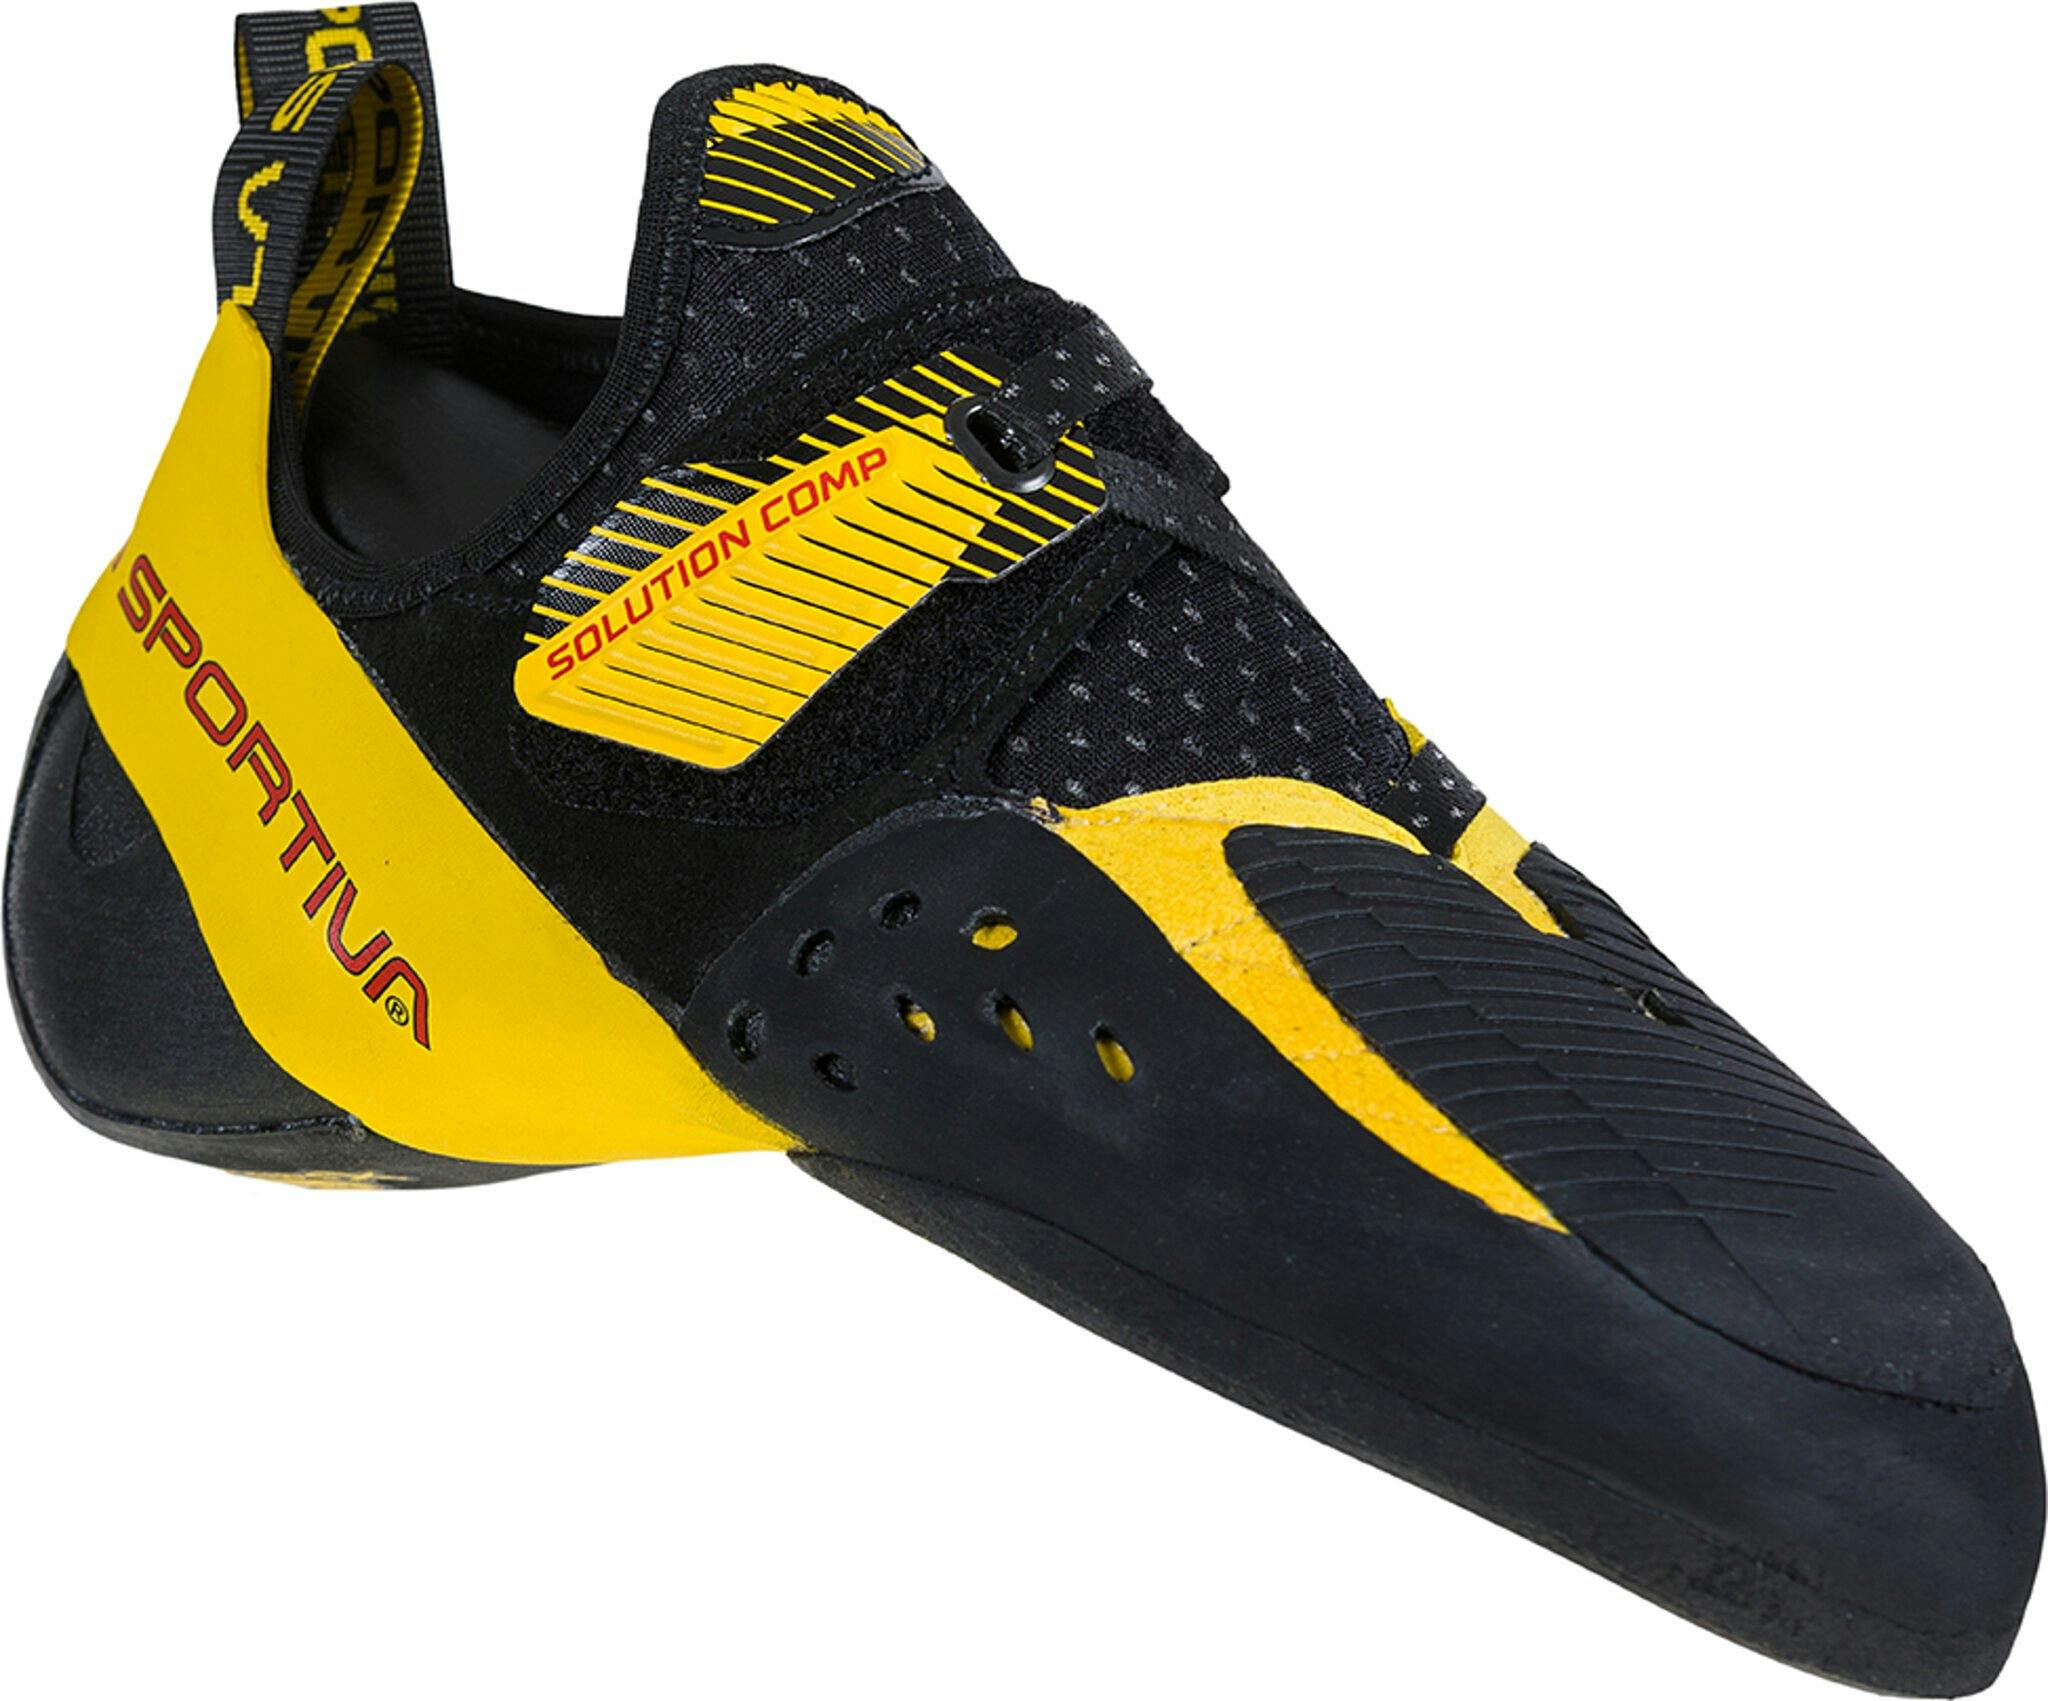 Product image for Solution Comp Climbing Shoes - Men's